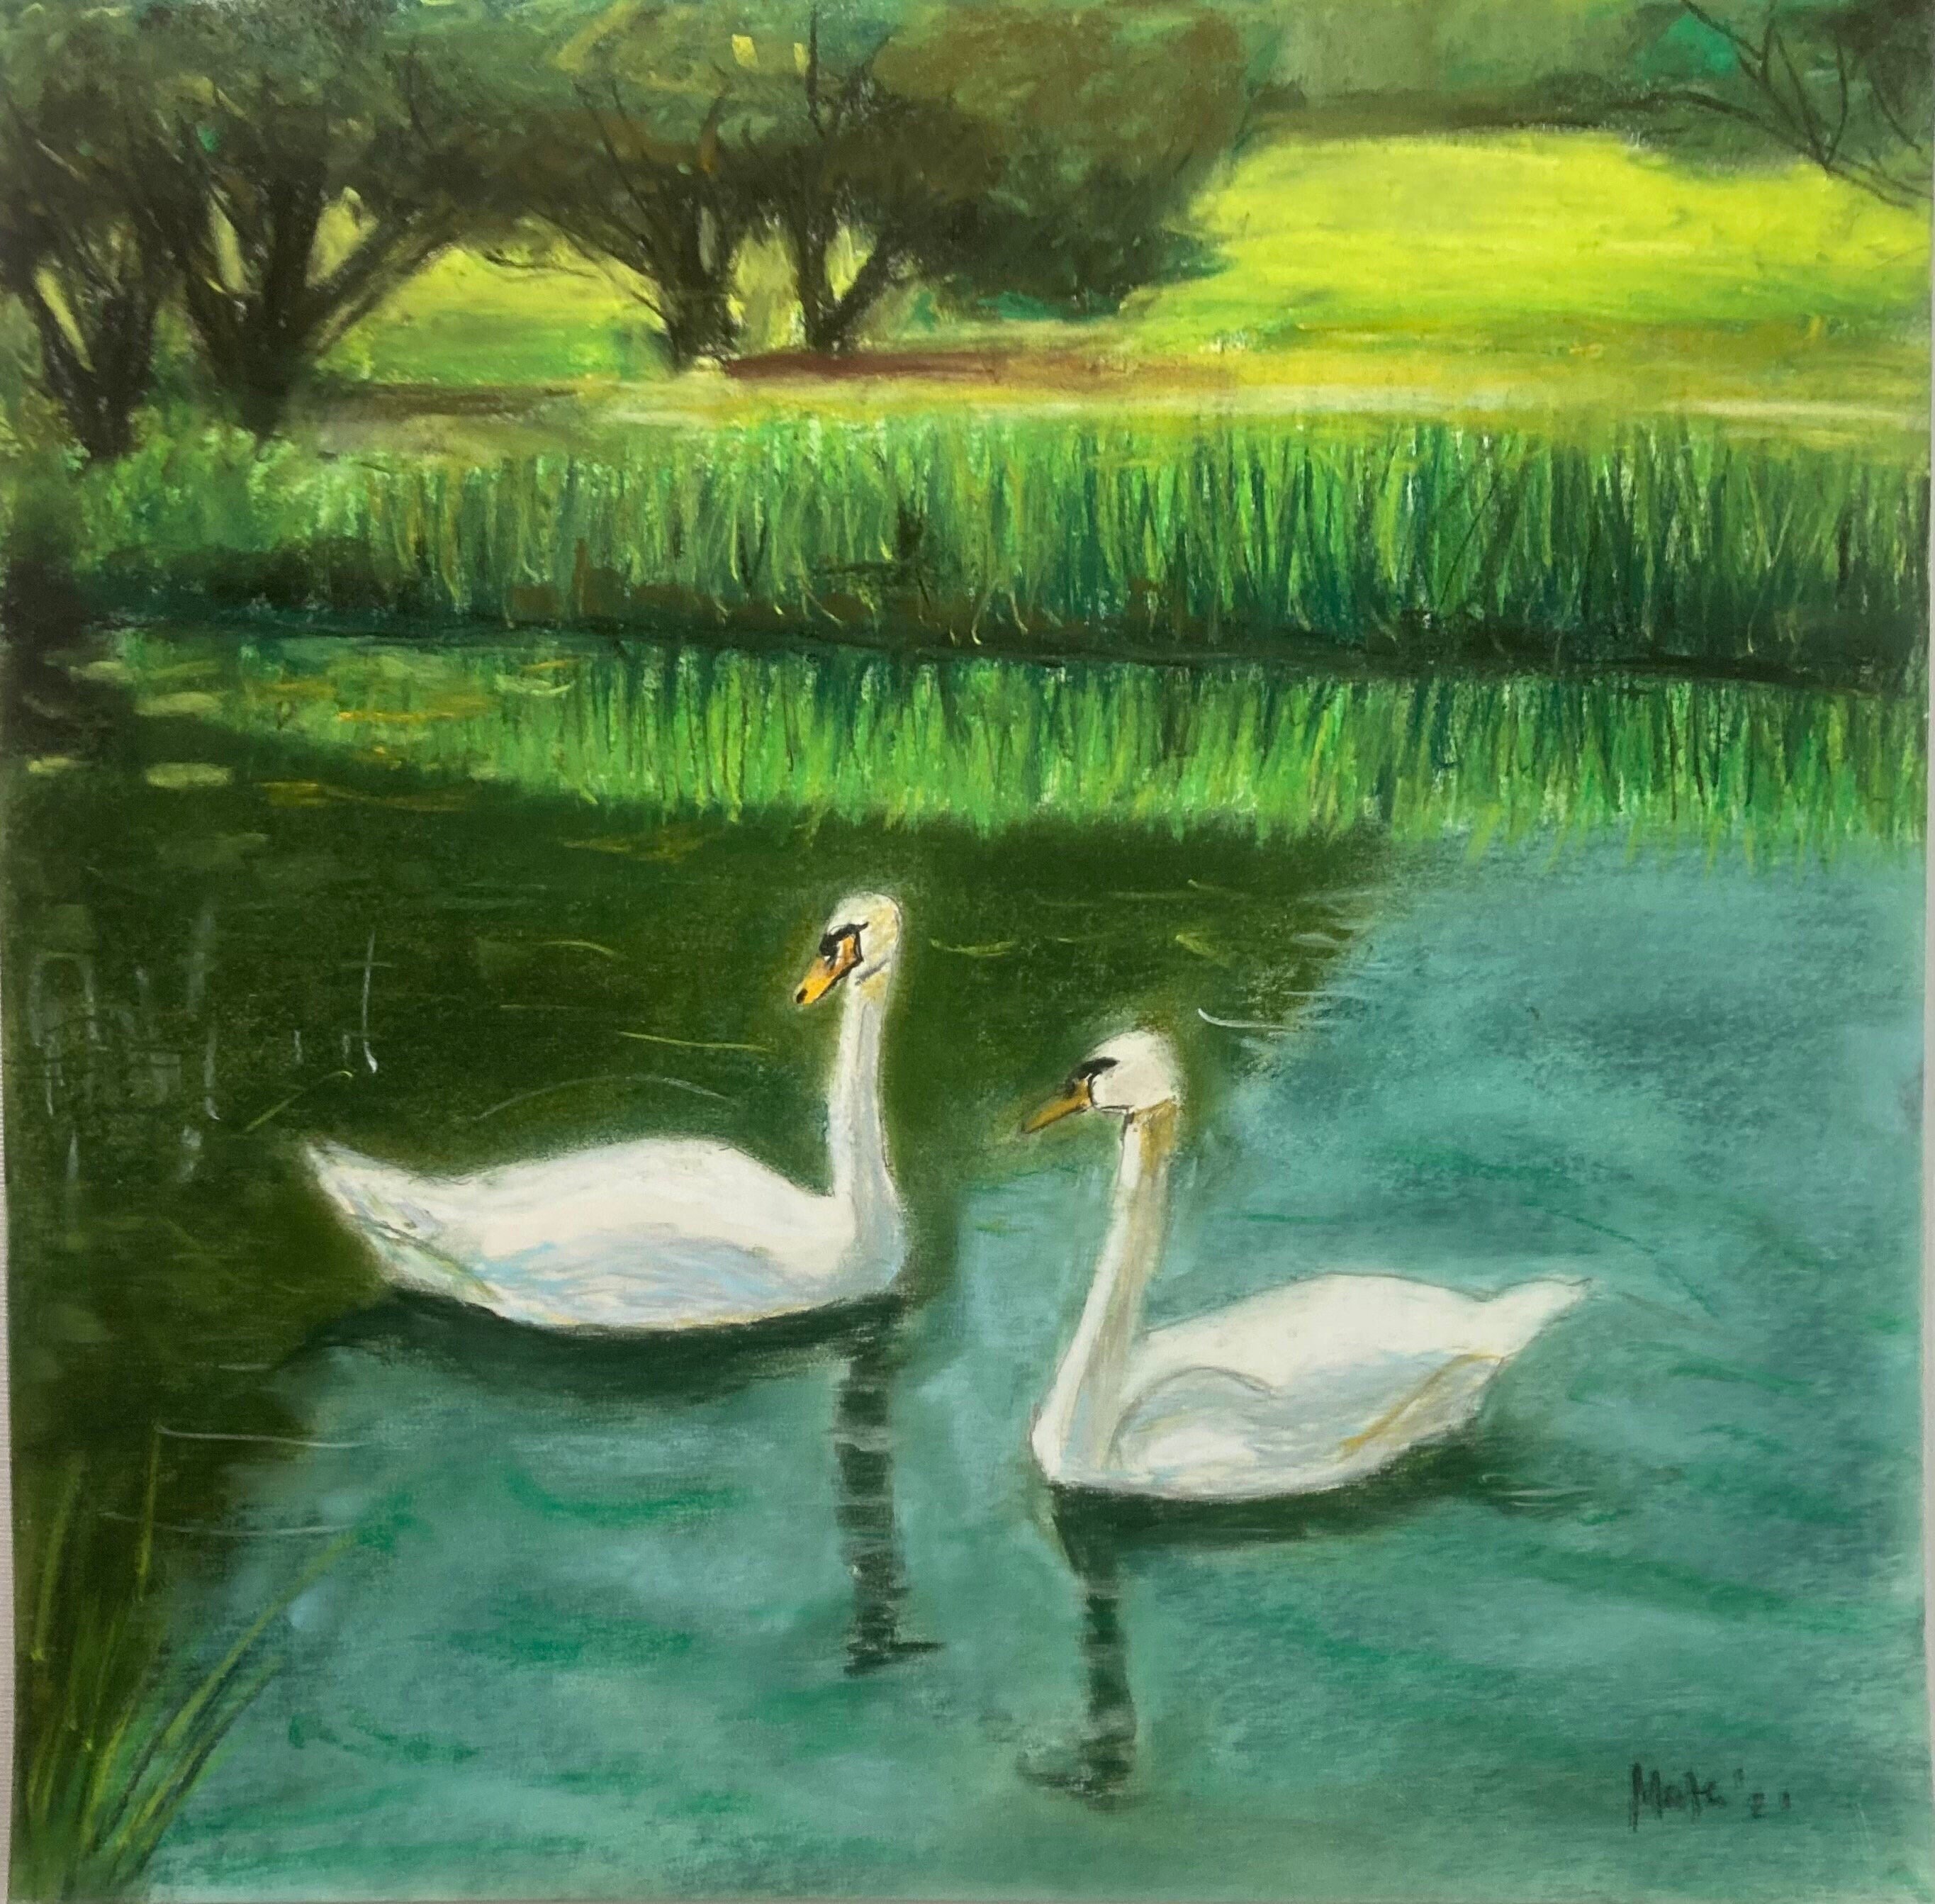 Two Swans in Water With Green Field and Trees in